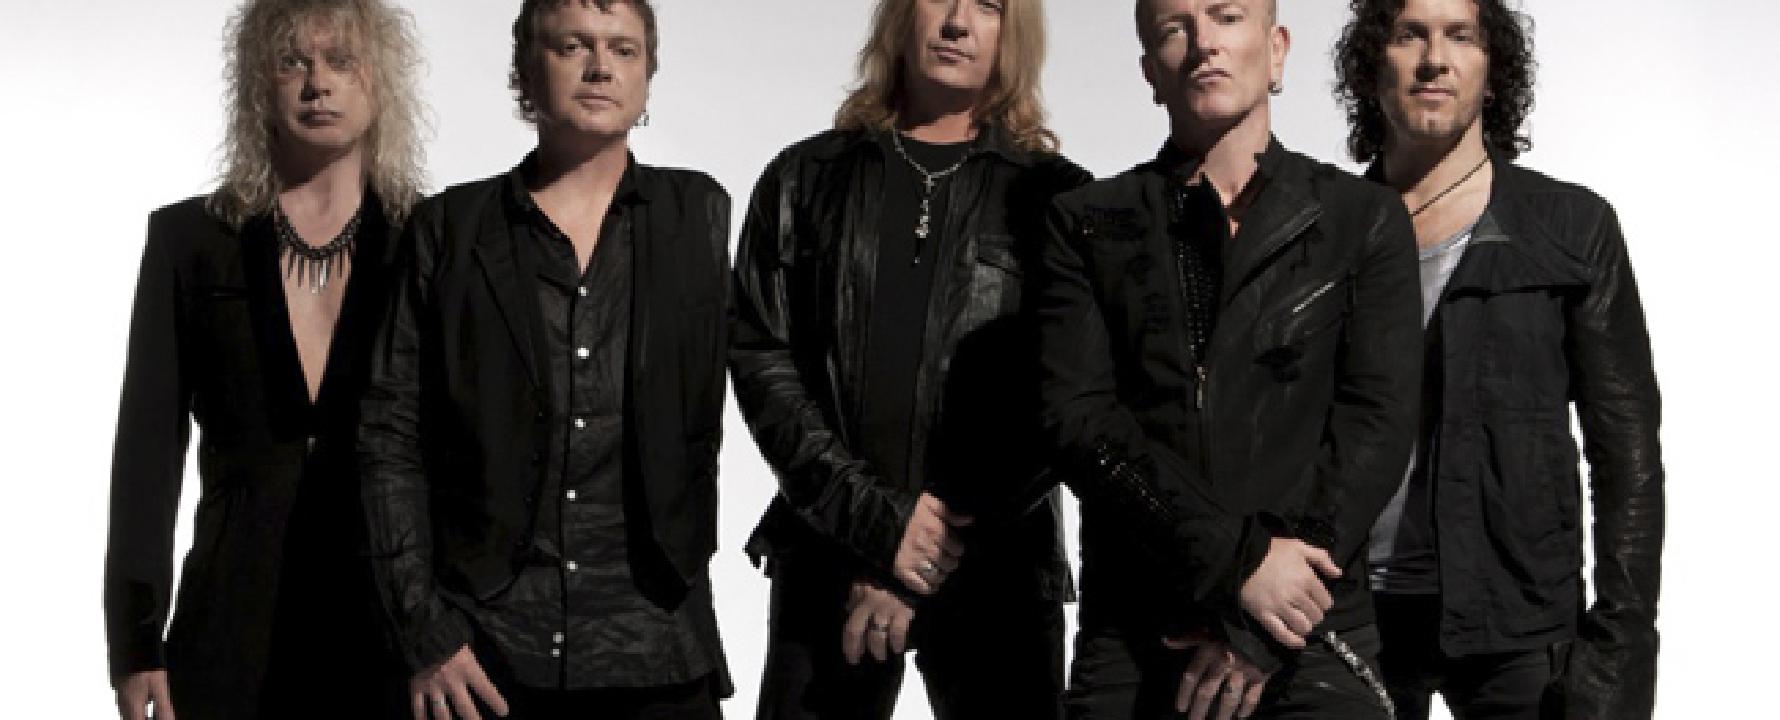 Promotional photograph of Def Leppard.